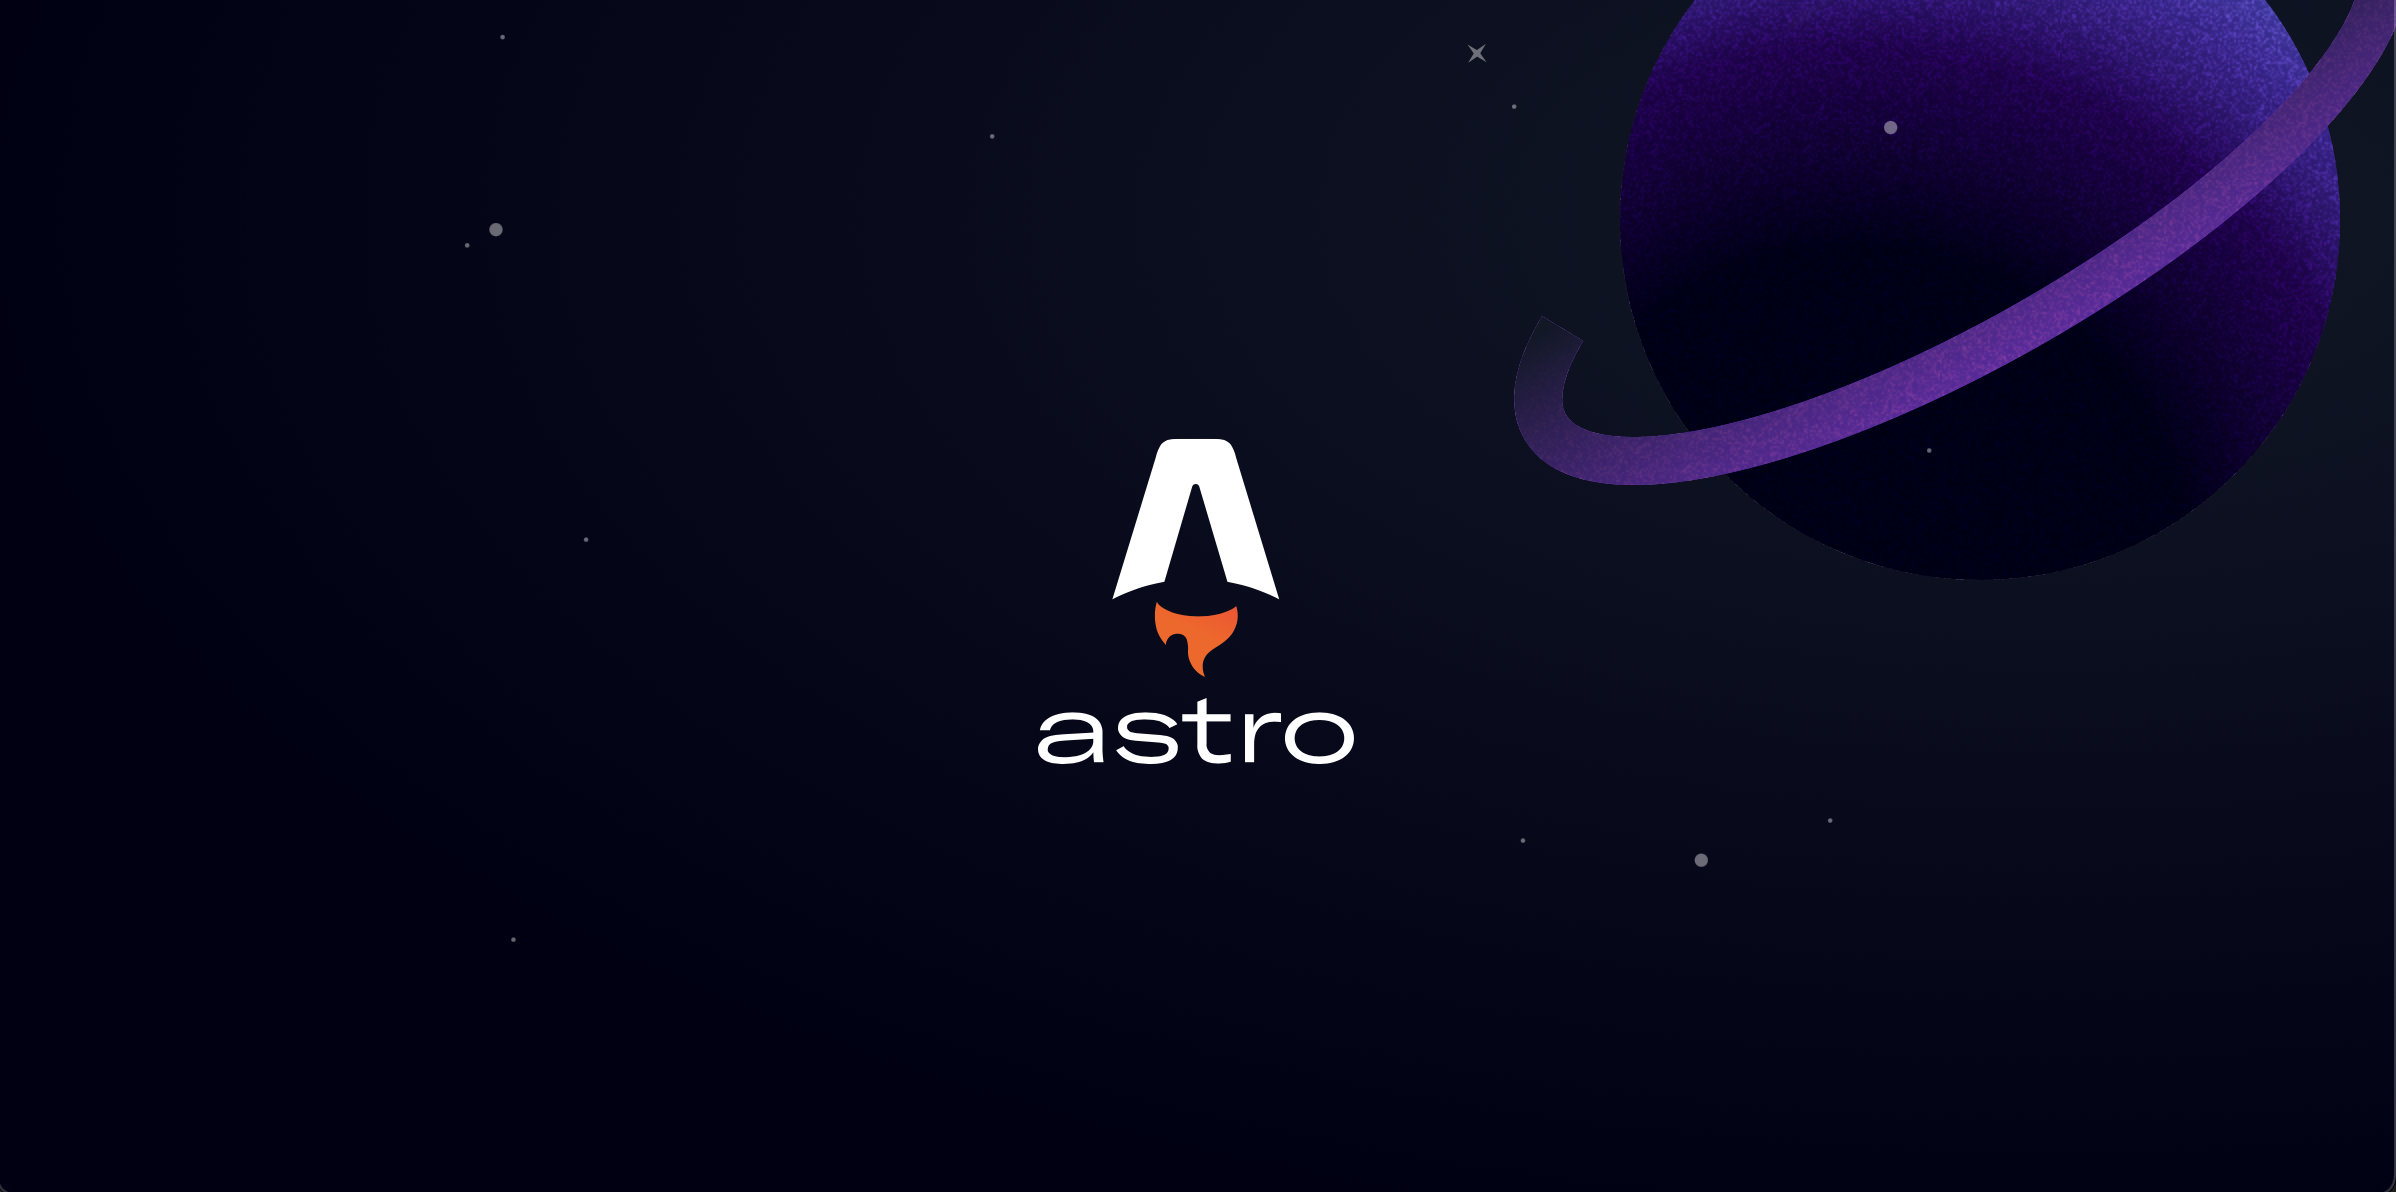 Welcome to my New Astro Blog!